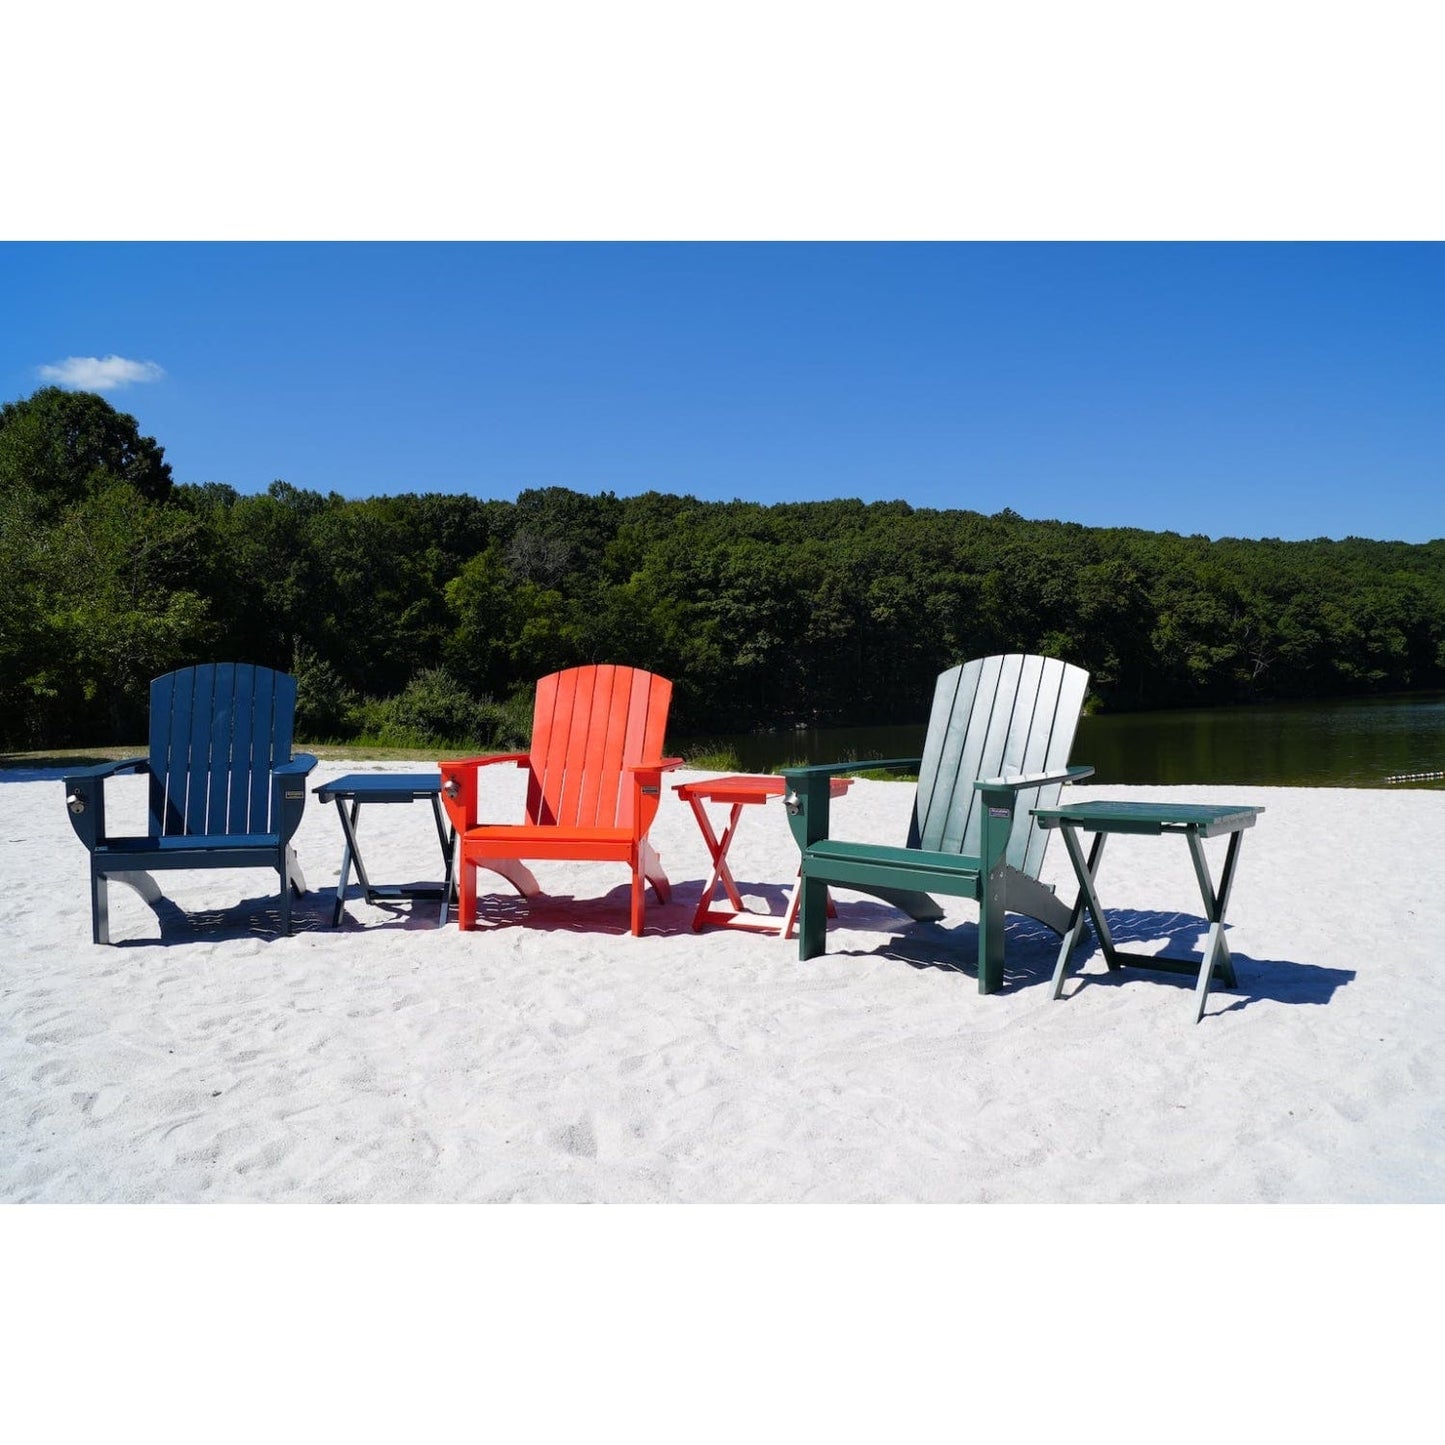 Riverstone Industries Outdoor Chairs Riverstone | Adirondack Chair with Side Table - White RSI-AC-WH-T